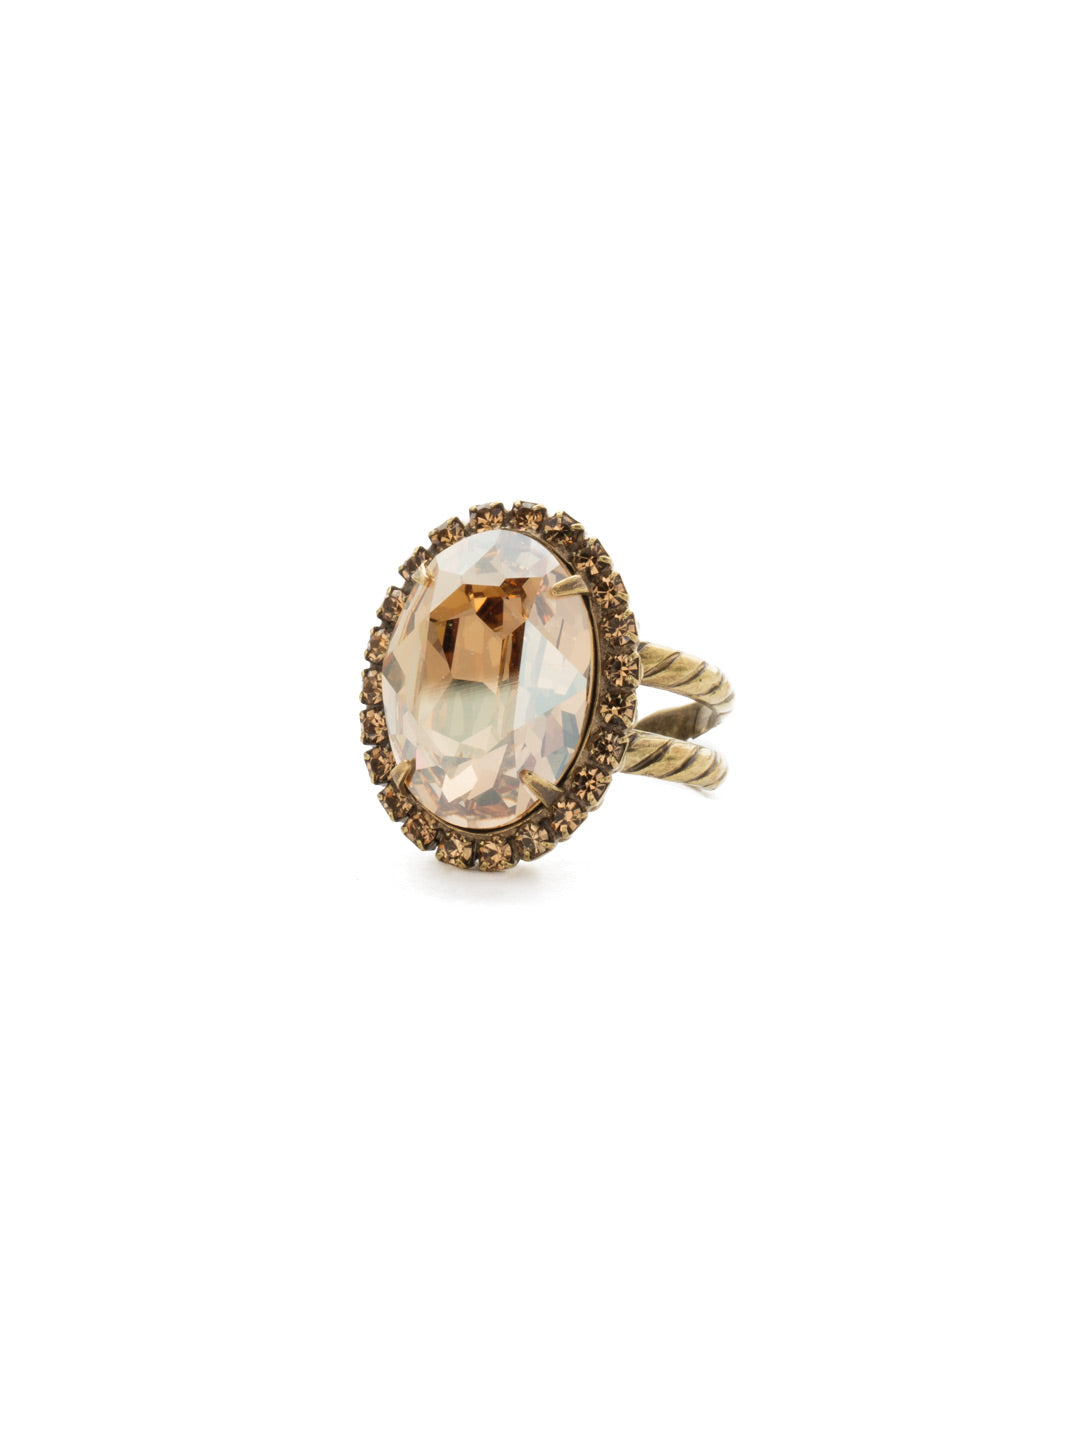 Classic Oval Cut Ring - RDG70AGNT - <p>A jewelry collection must! This glamorous ring features a bold oval cut center crystal surrounded by crystal accents that sits on an adjustable, textured band. An antique-inspired classic. From Sorrelli's Neutral Territory collection in our Antique Gold-tone finish.</p>